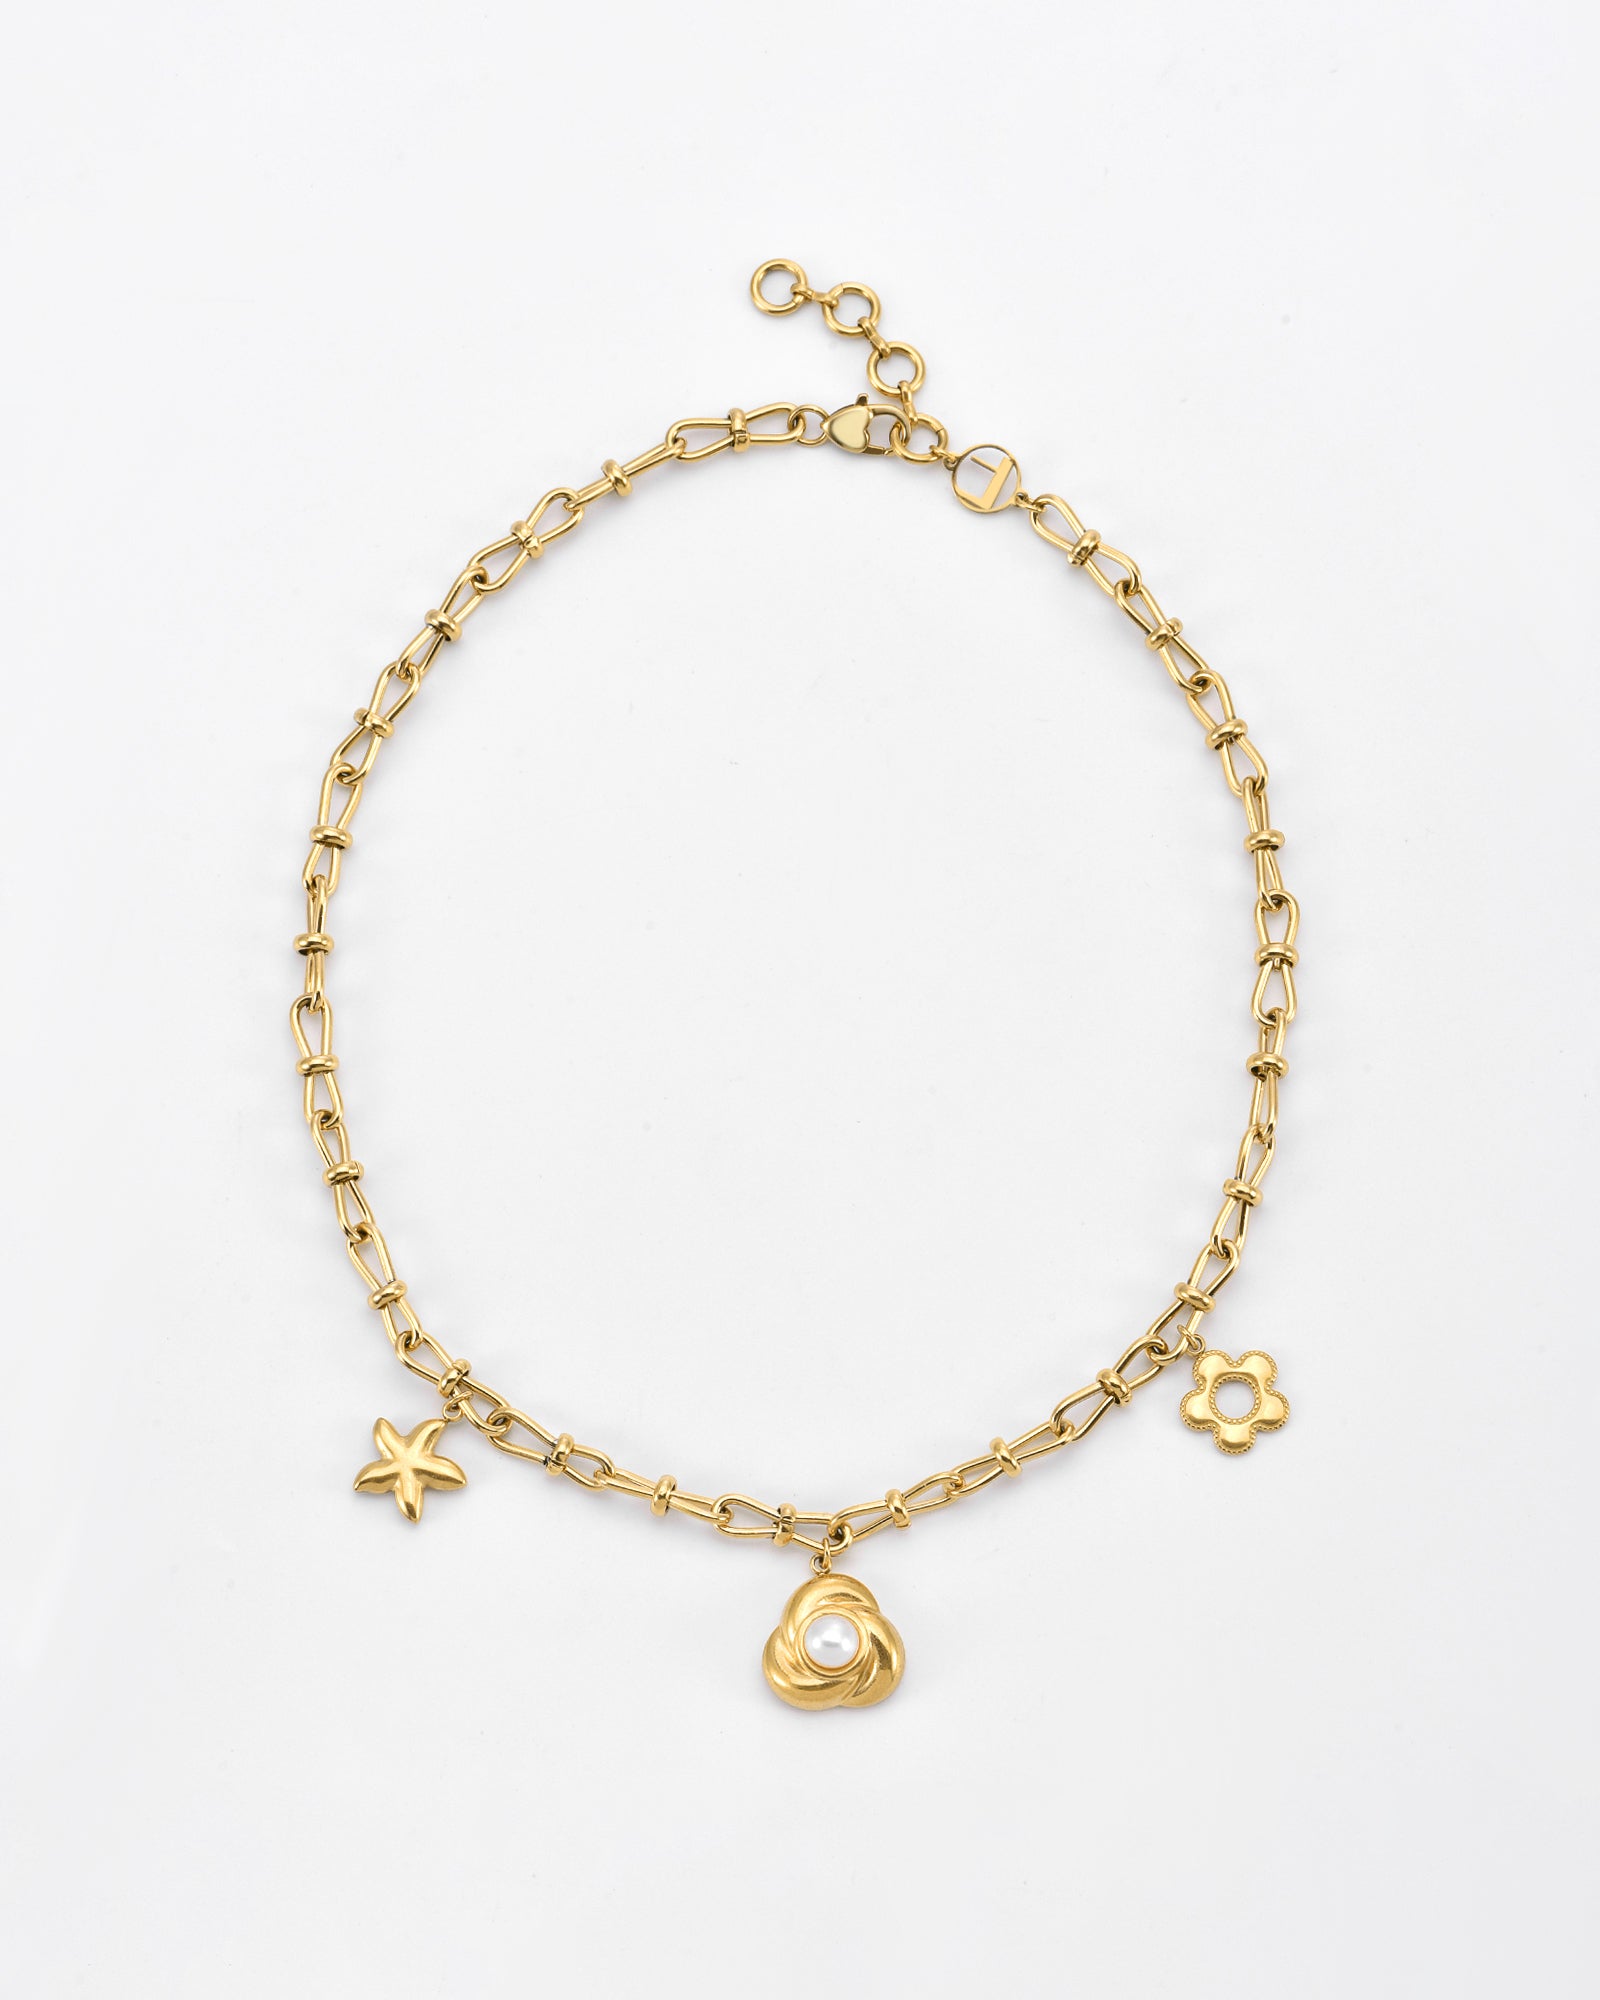 The For Art&#39;s Sake® Daisy Necklace Gold is a 24-karat gold plated chain necklace with a starfish charm, a central charm featuring a freshwater pearl encased in a gold setting, and a daisy flower charm. The necklace has an adjustable clasp closure.